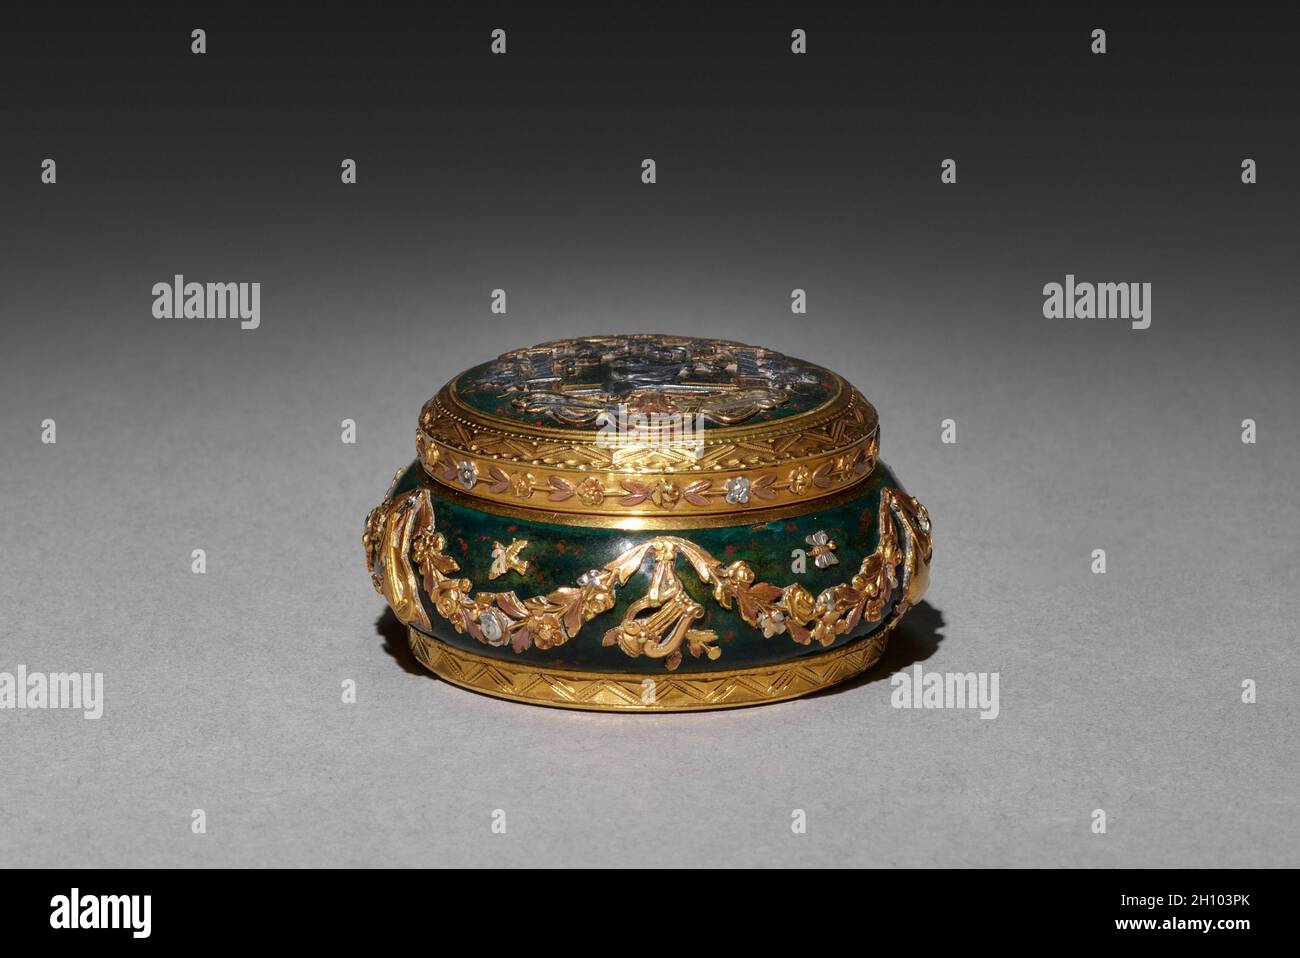 Bonbonniere, 1850-1899. France, 19th century. Bloodstone (?) mounted in colored golds; diameter: 5 cm (1 15/16 in.). Stock Photo